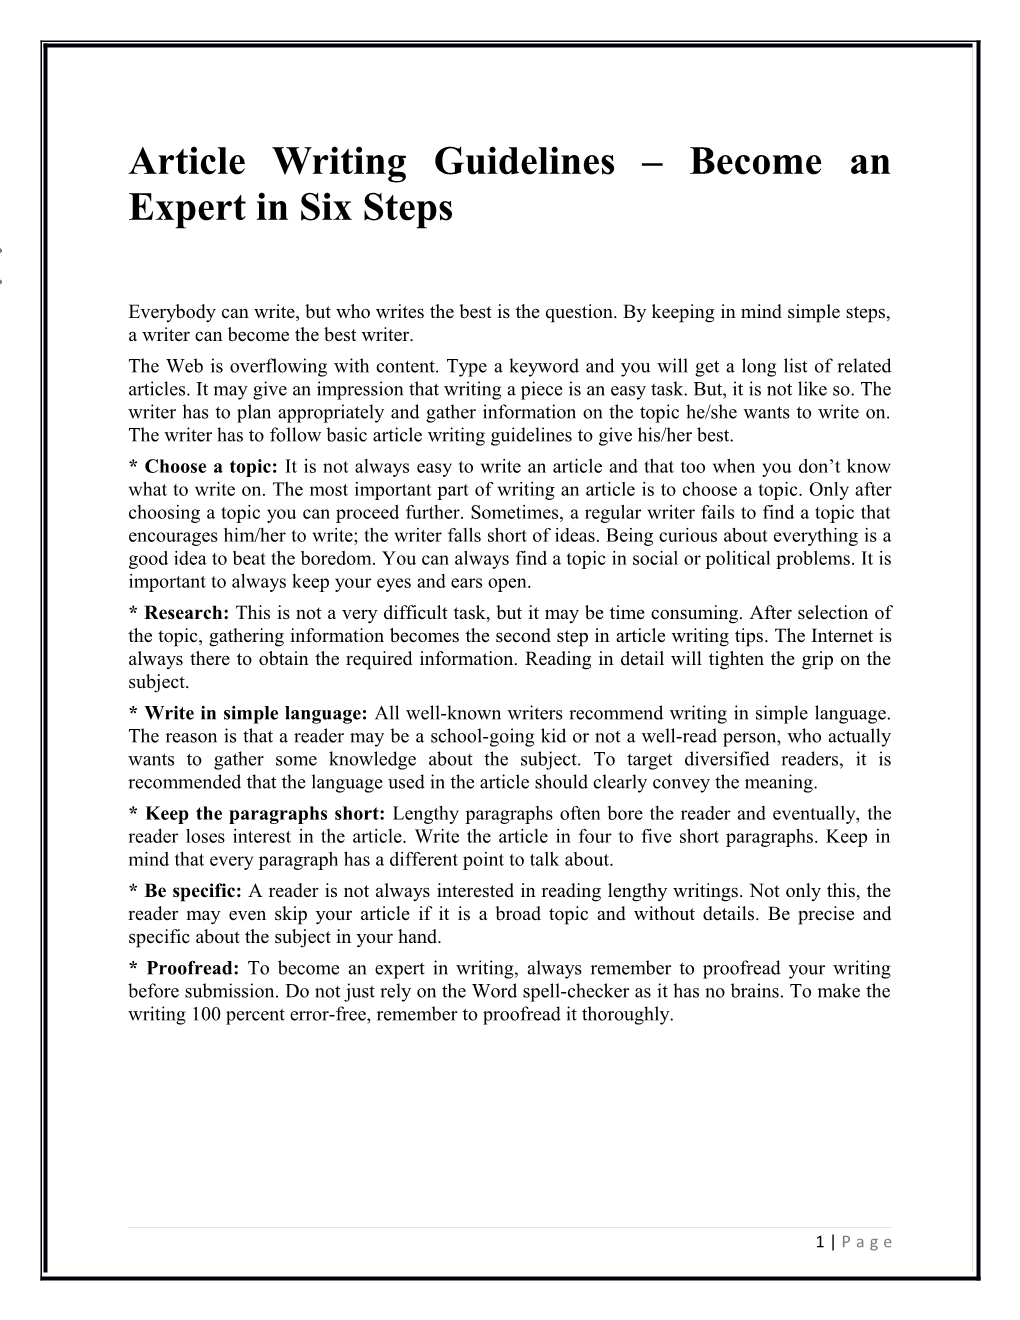 Article Writing Guidelines Become an Expert in Six Steps